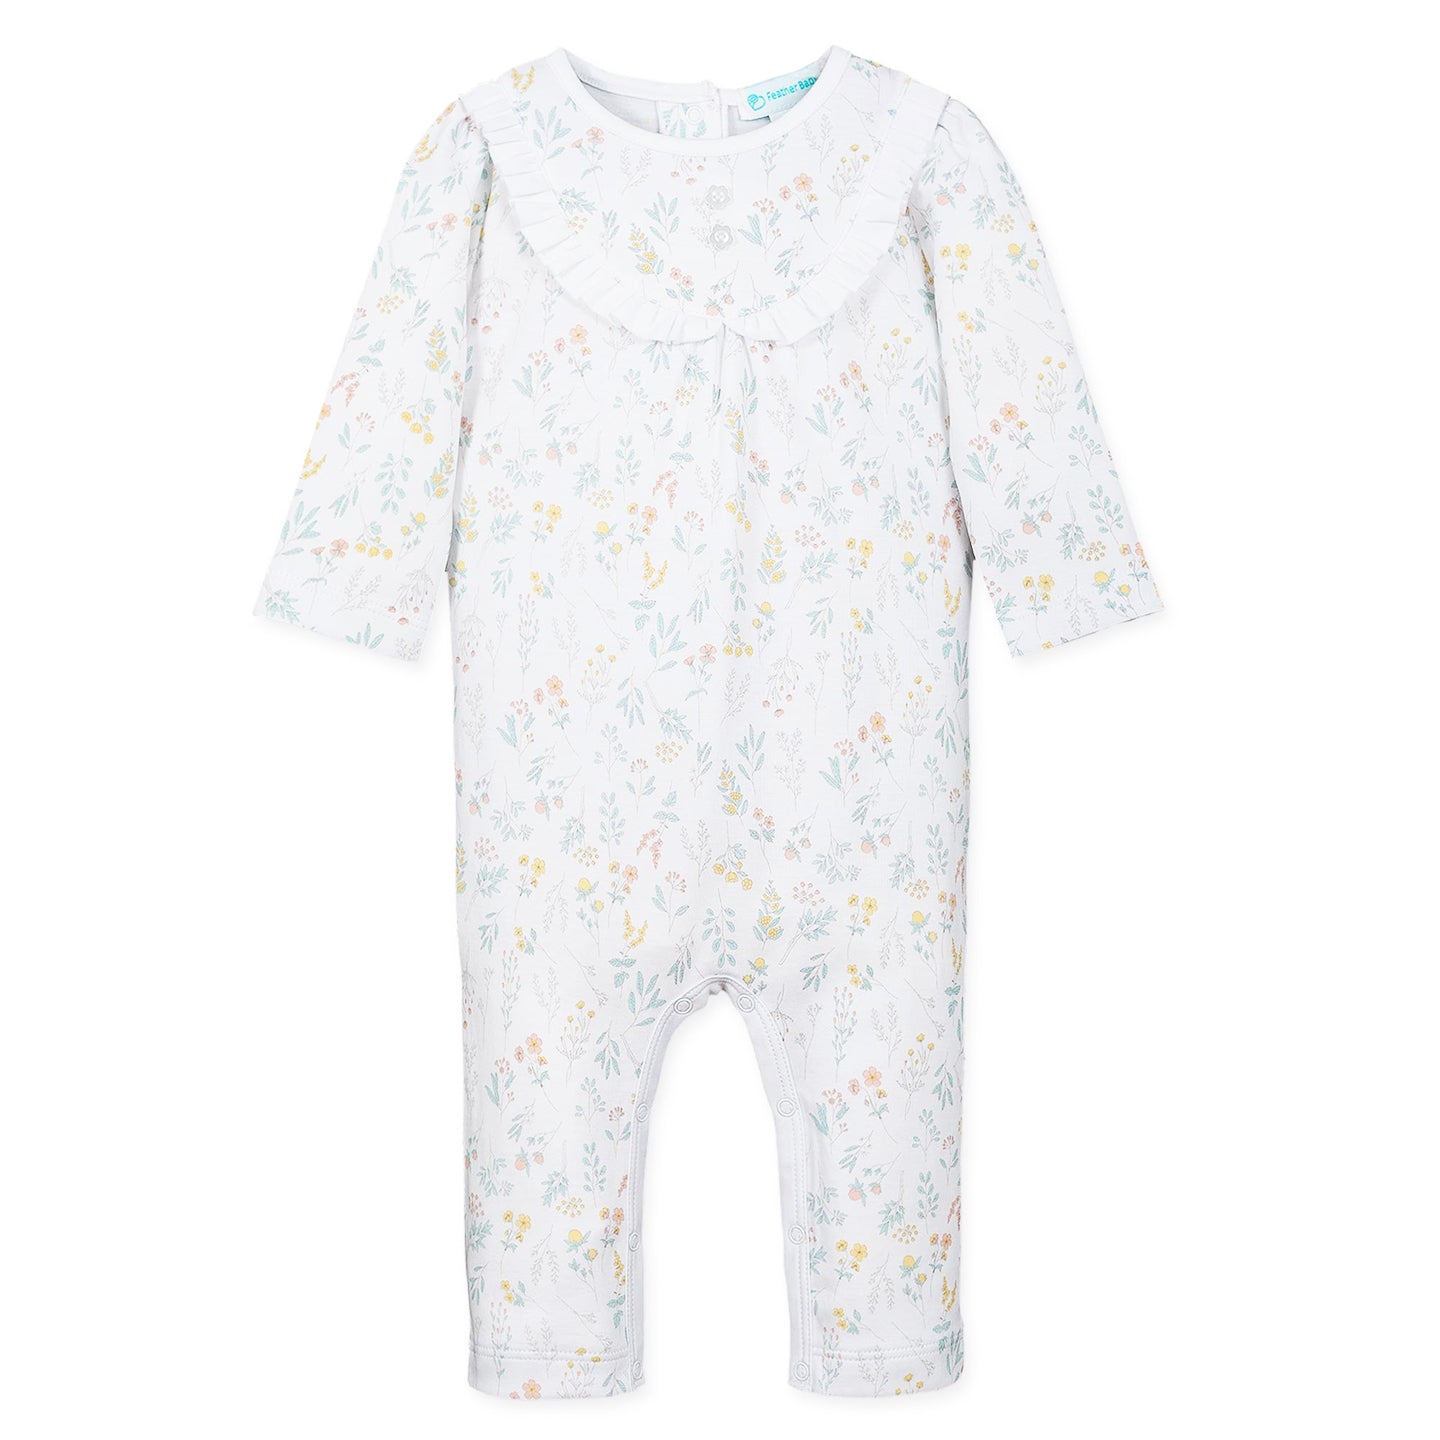 Feather Baby 'Evelyn Floral' Ruffle Romper